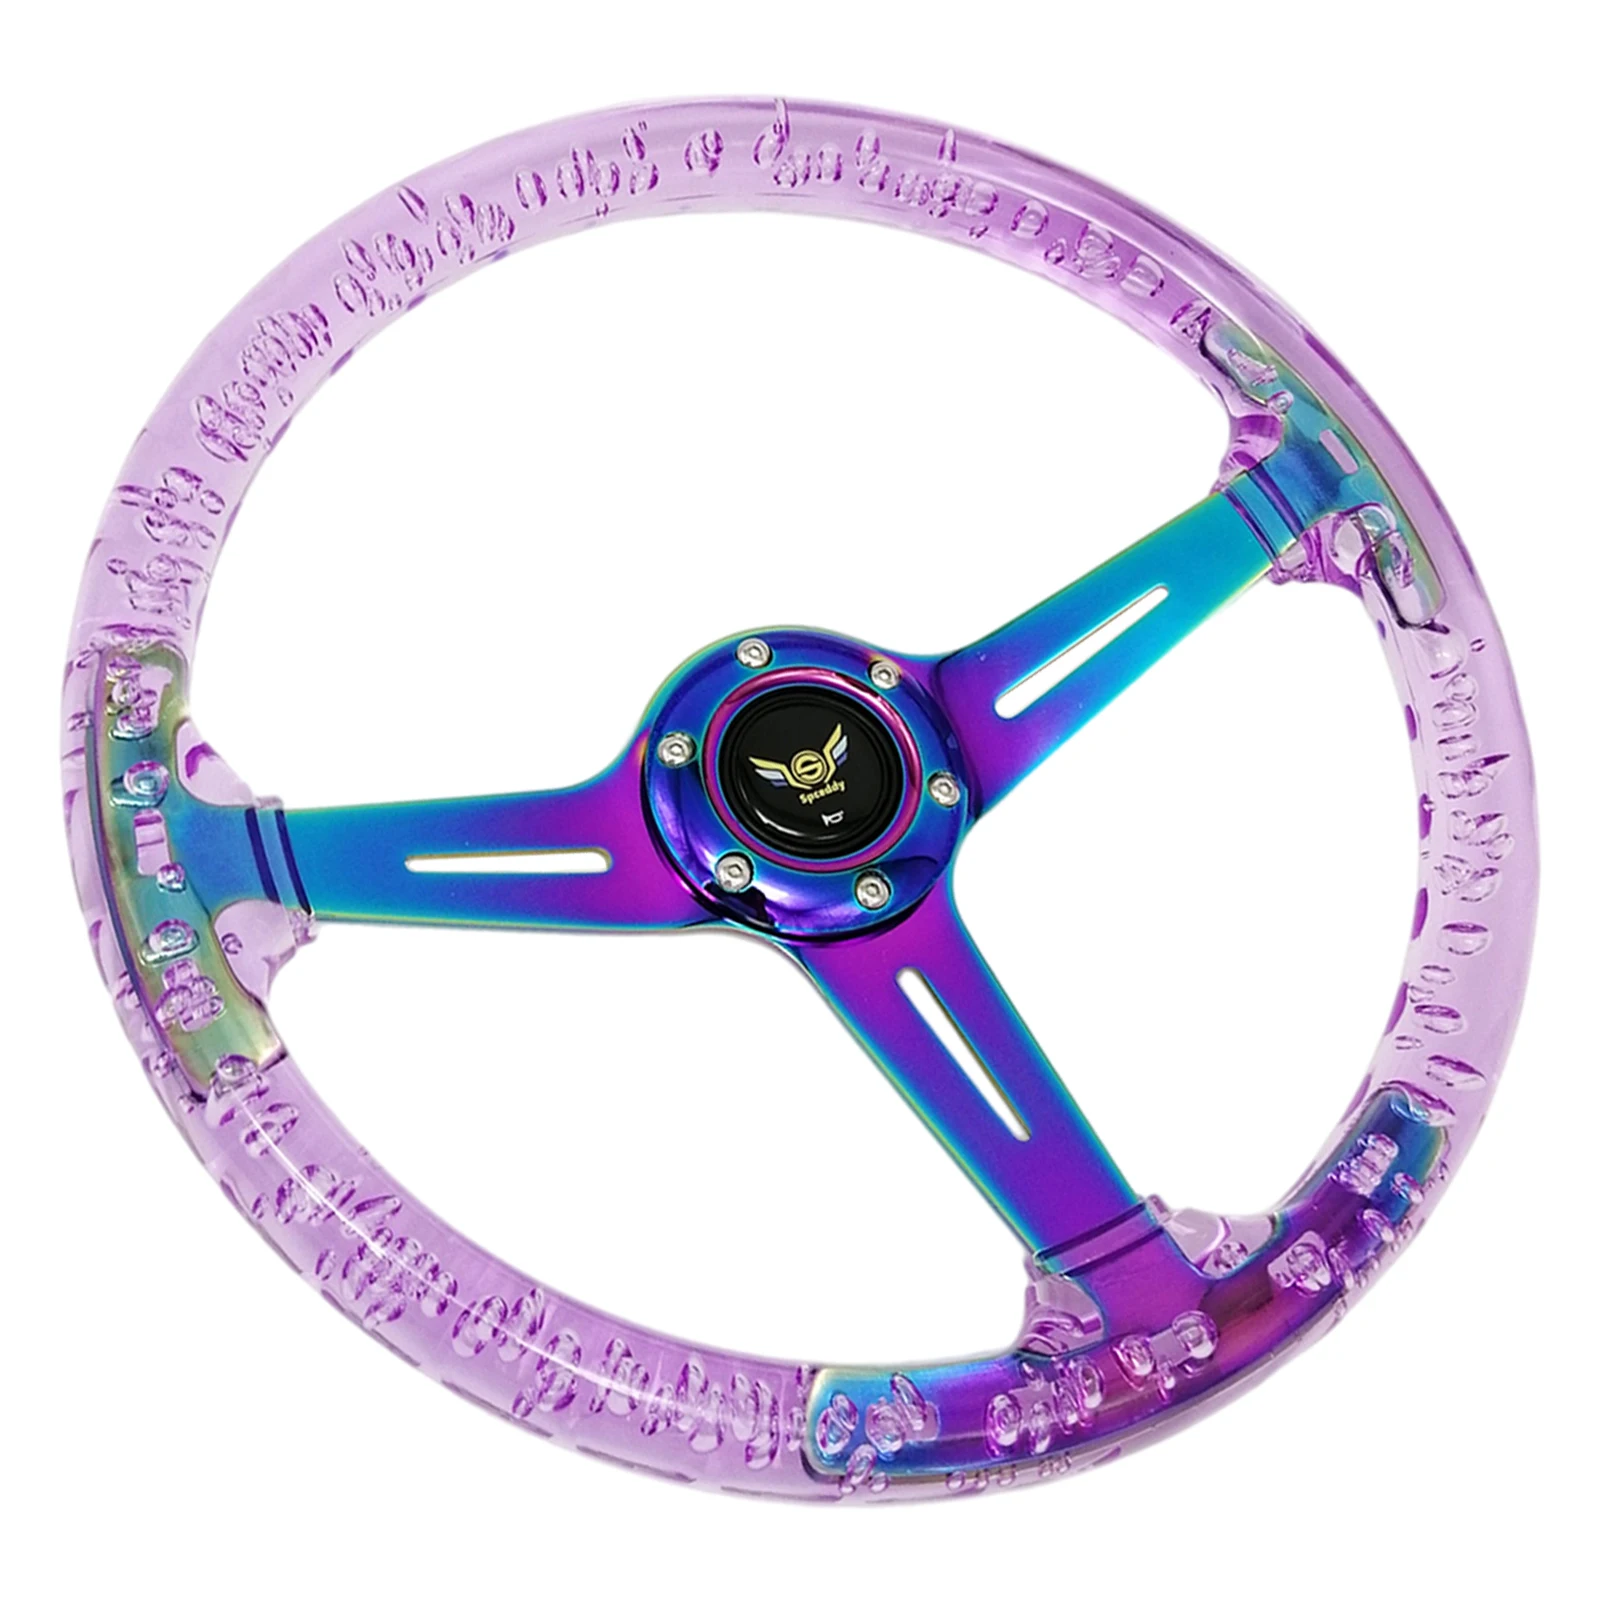 14 inch Acrylic Racing Steering Wheel for Race Car Modification Drifting Steering Wheel Accessories